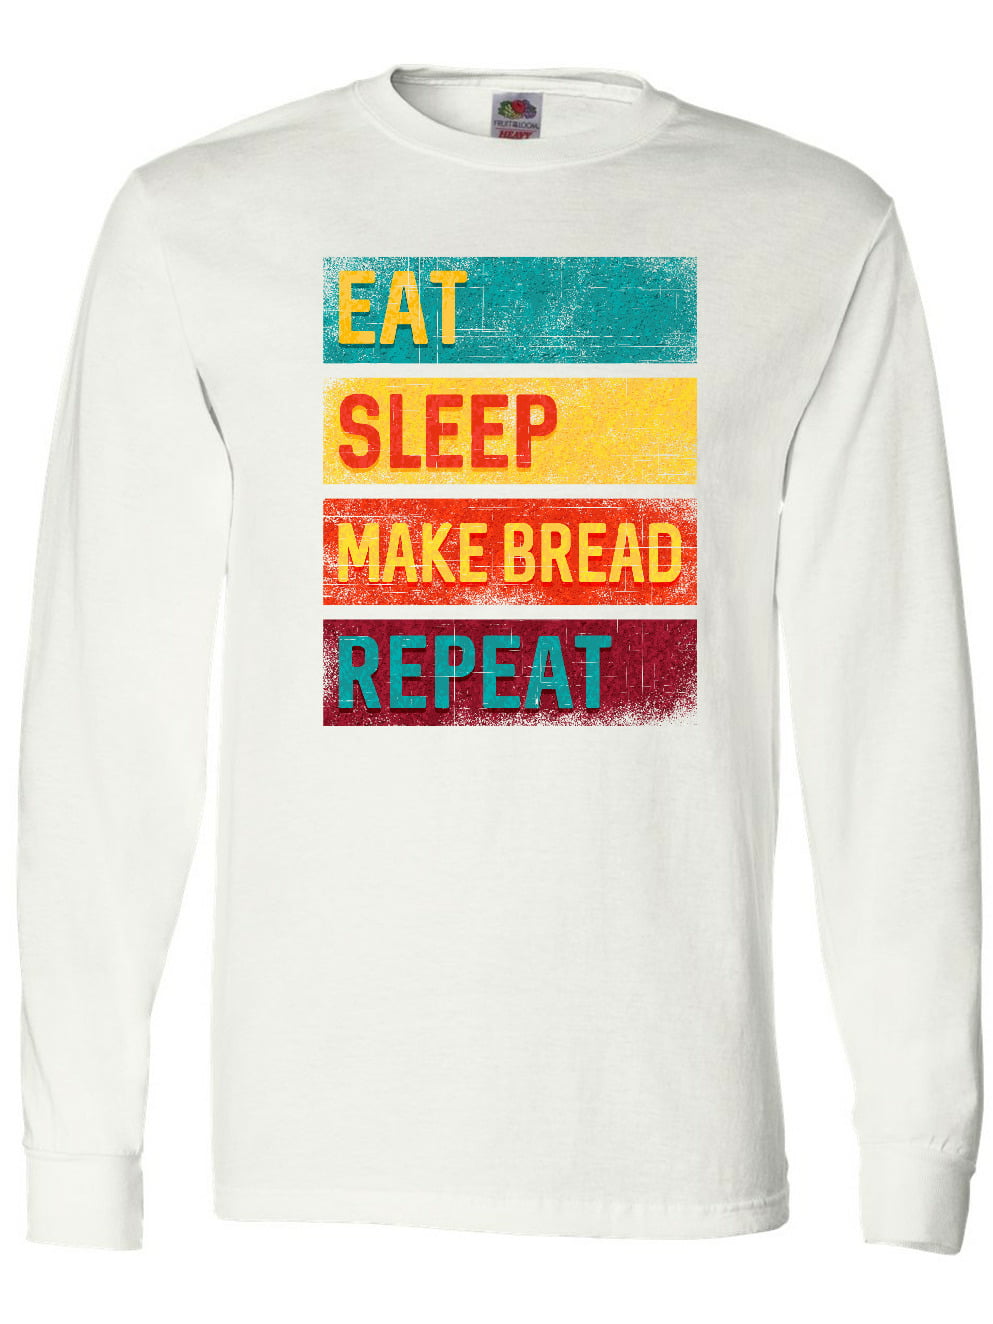 EAT SLEEP COOK REPEAT T-Shirt Funny Chef Food Cooking Baker Baking Gift S-5XL 